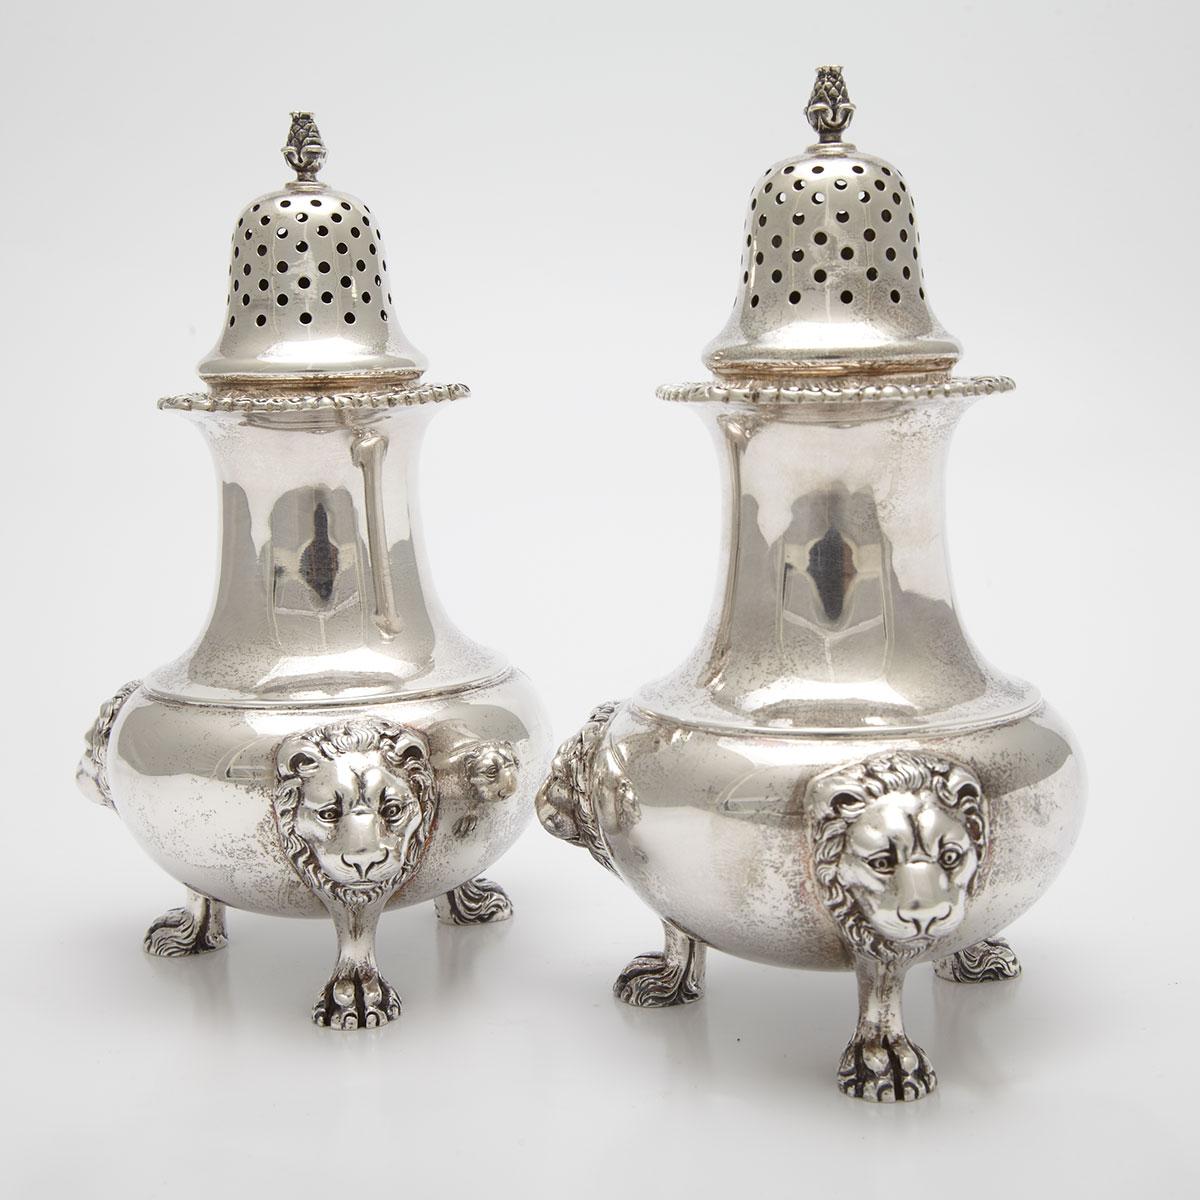 Pair of Canadian Silver Sugar Casters, Henry Birks & Sons, Montreal, Que., 1928